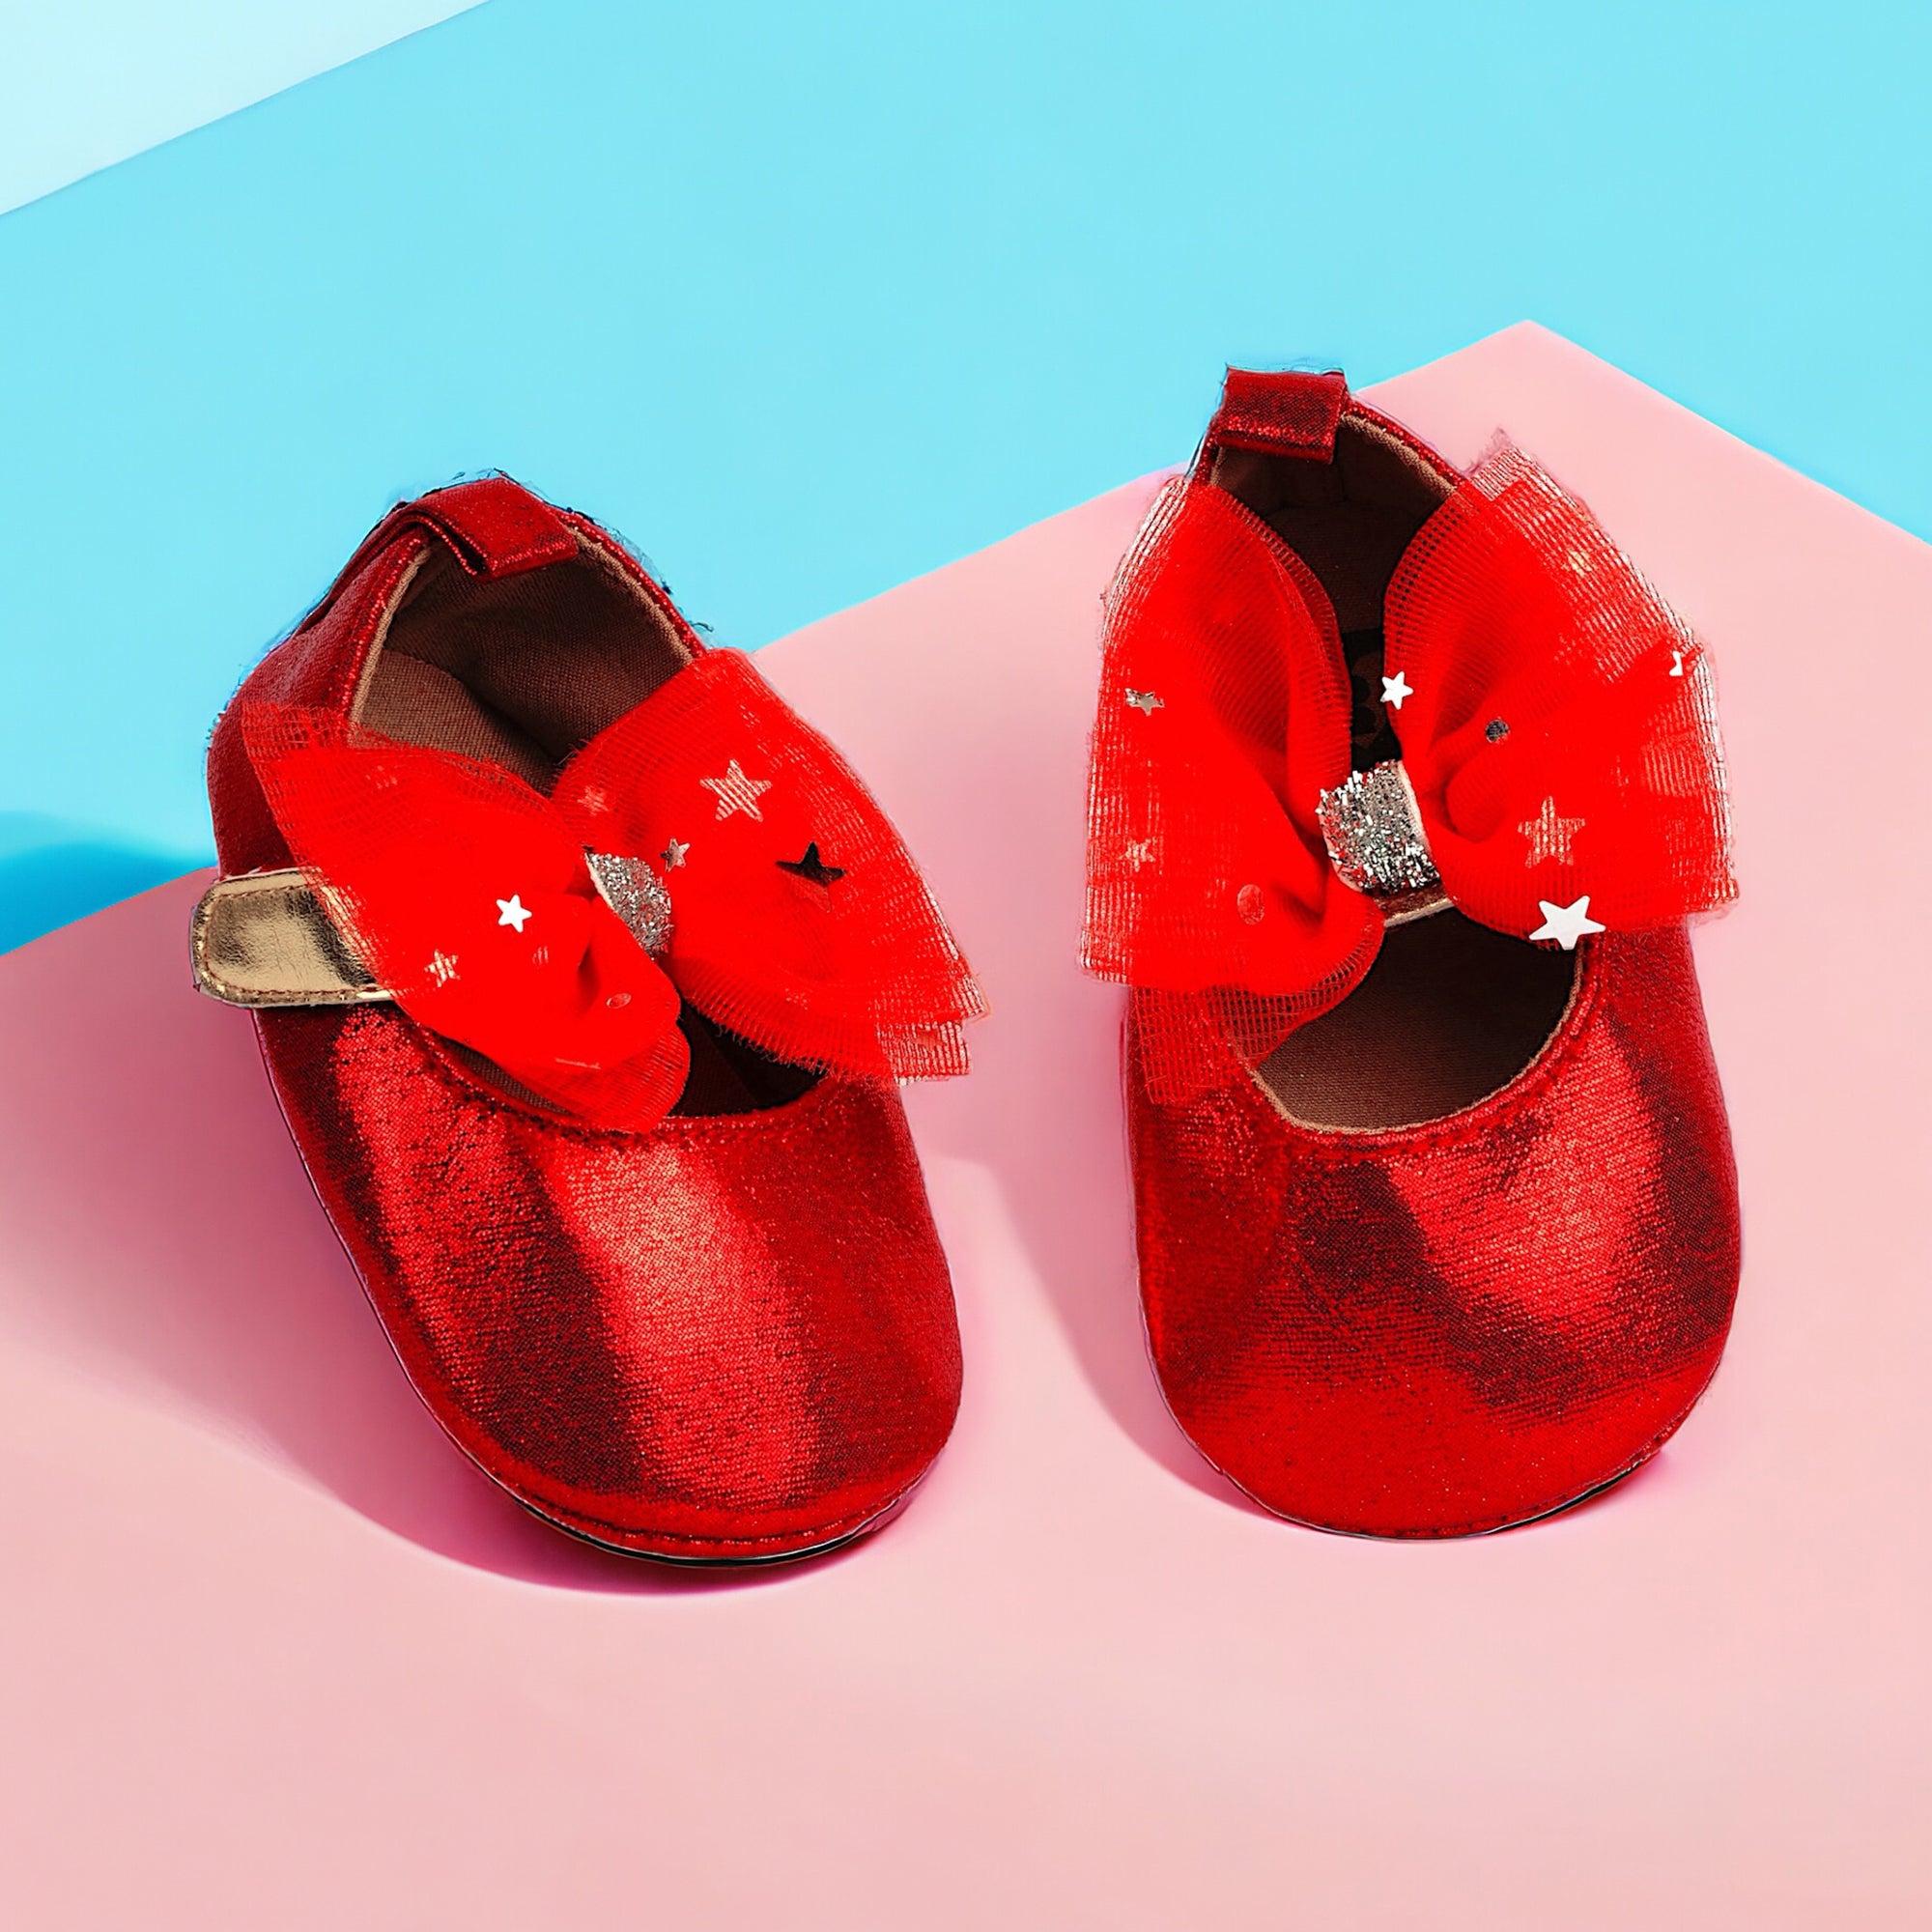 Baby Moo Starry Bow Partywear Anti-Skid Ballerina Booties - Red